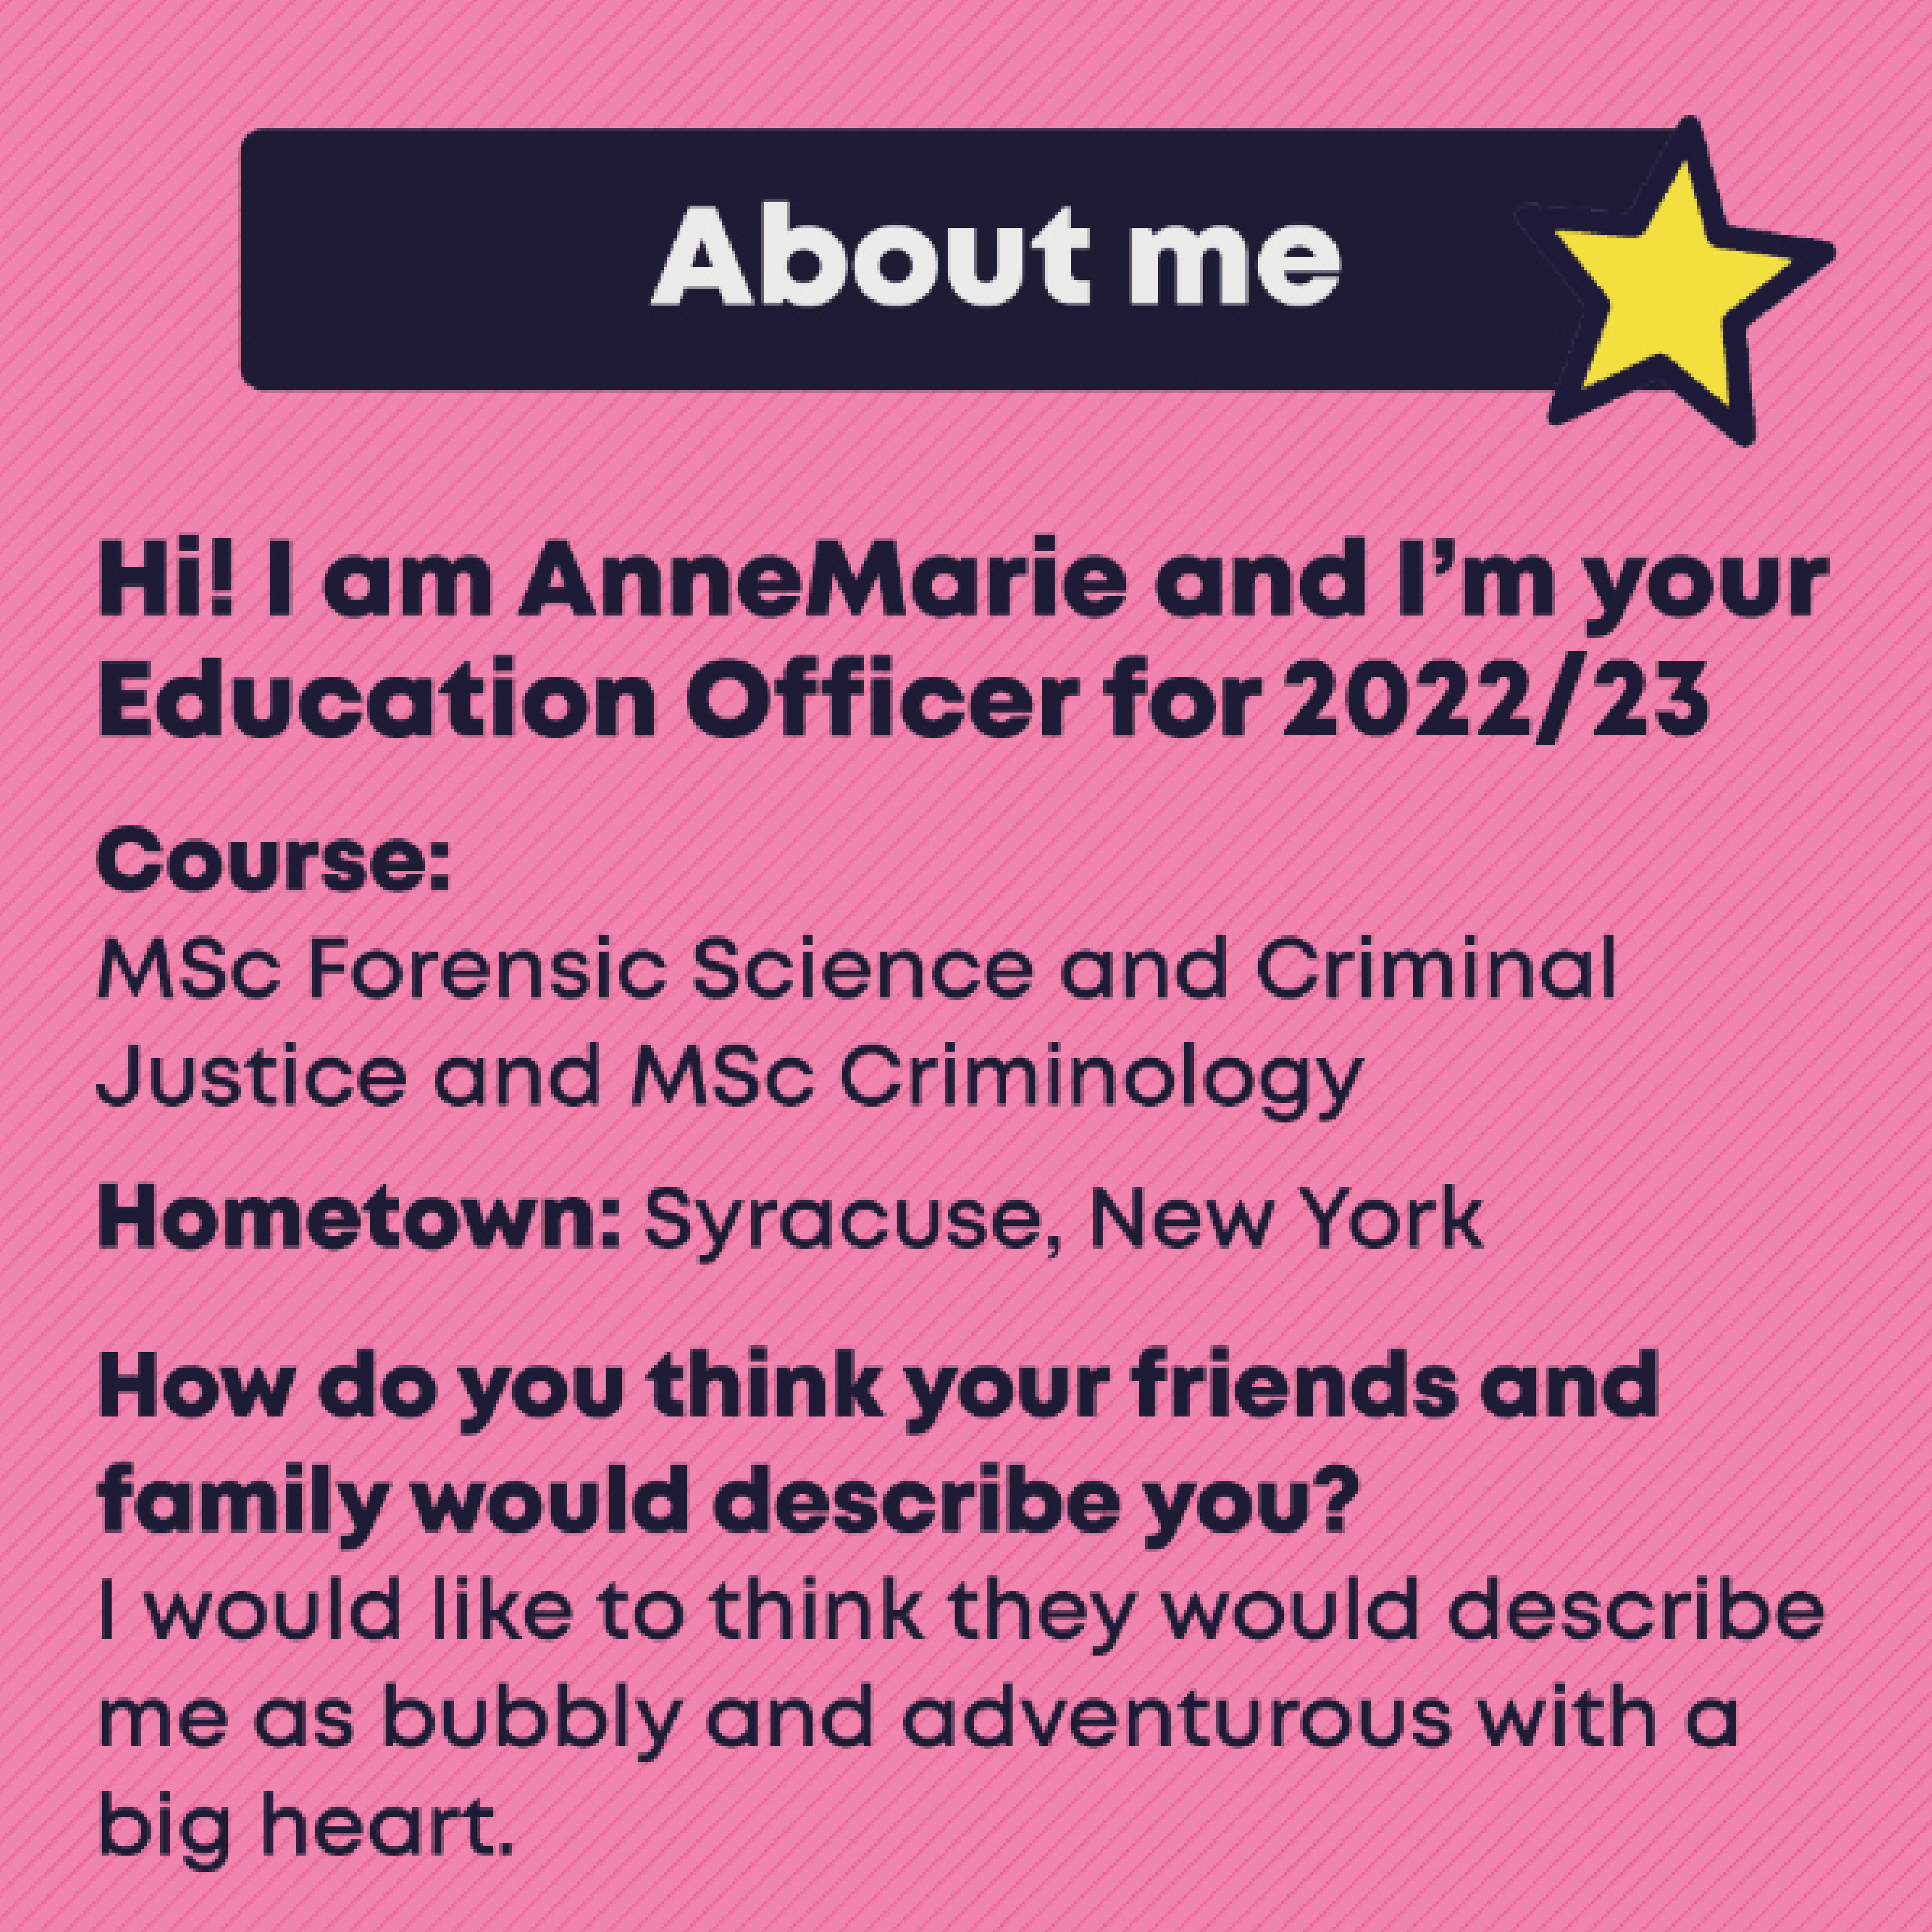 About me. Hi! I am AnneMarie and I’m your  Education Officer for 2022/23. Course:  MSc Forensic Science and Criminal  Justice and MSc Criminology. Hometown: Syracuse, New York. How do you think your friends and family would describe you? I would like to think they would describe me as bubbly and adventurous with a big heart.